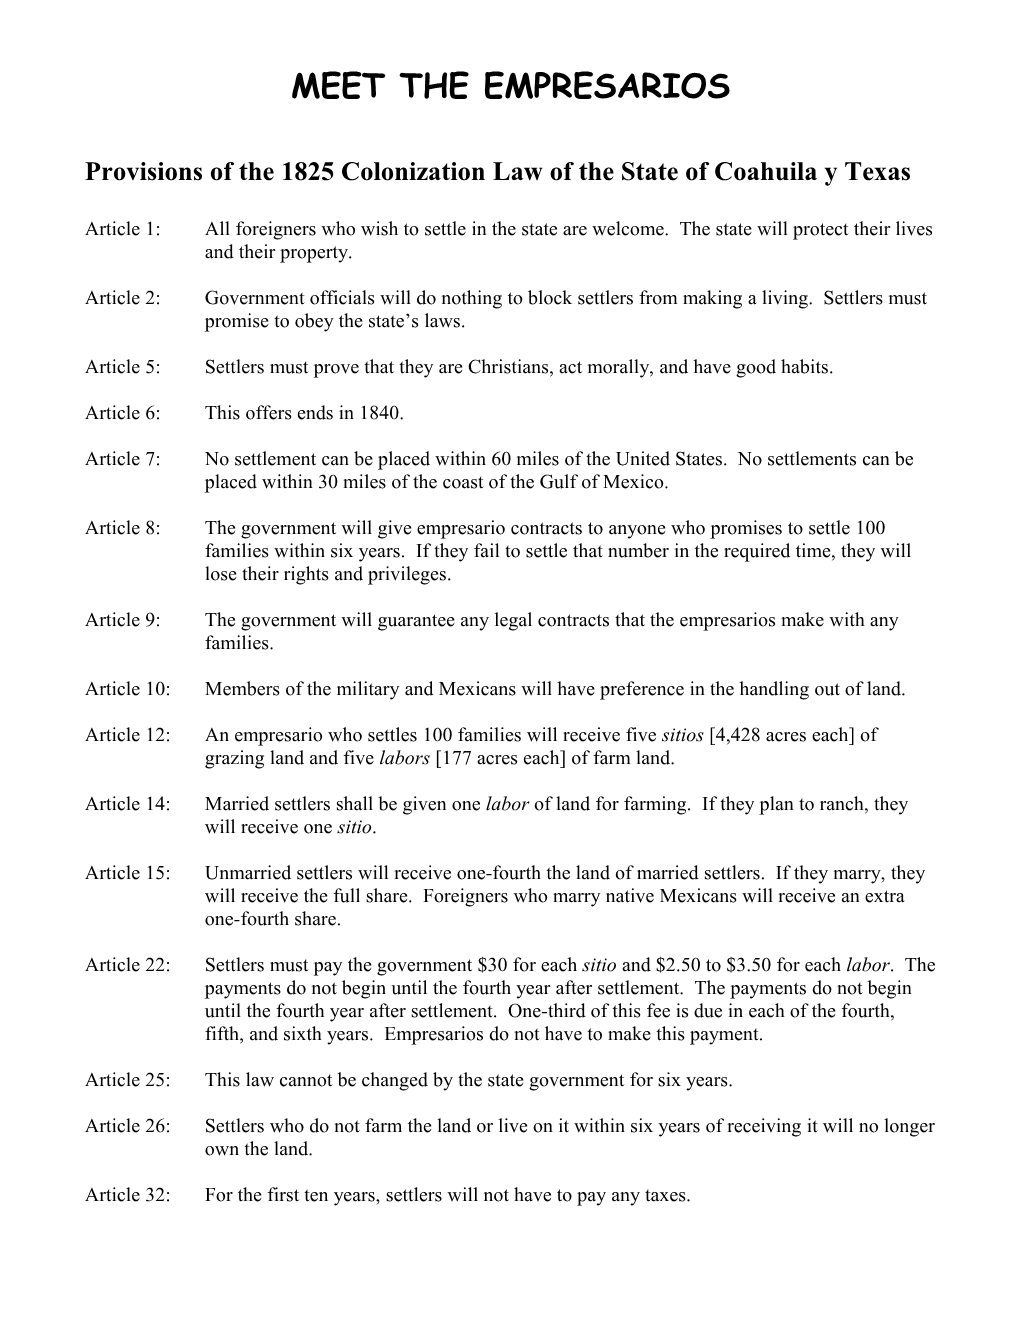 Provisions of the 1825 Colonization Law of the State of Coahuila Y Texas